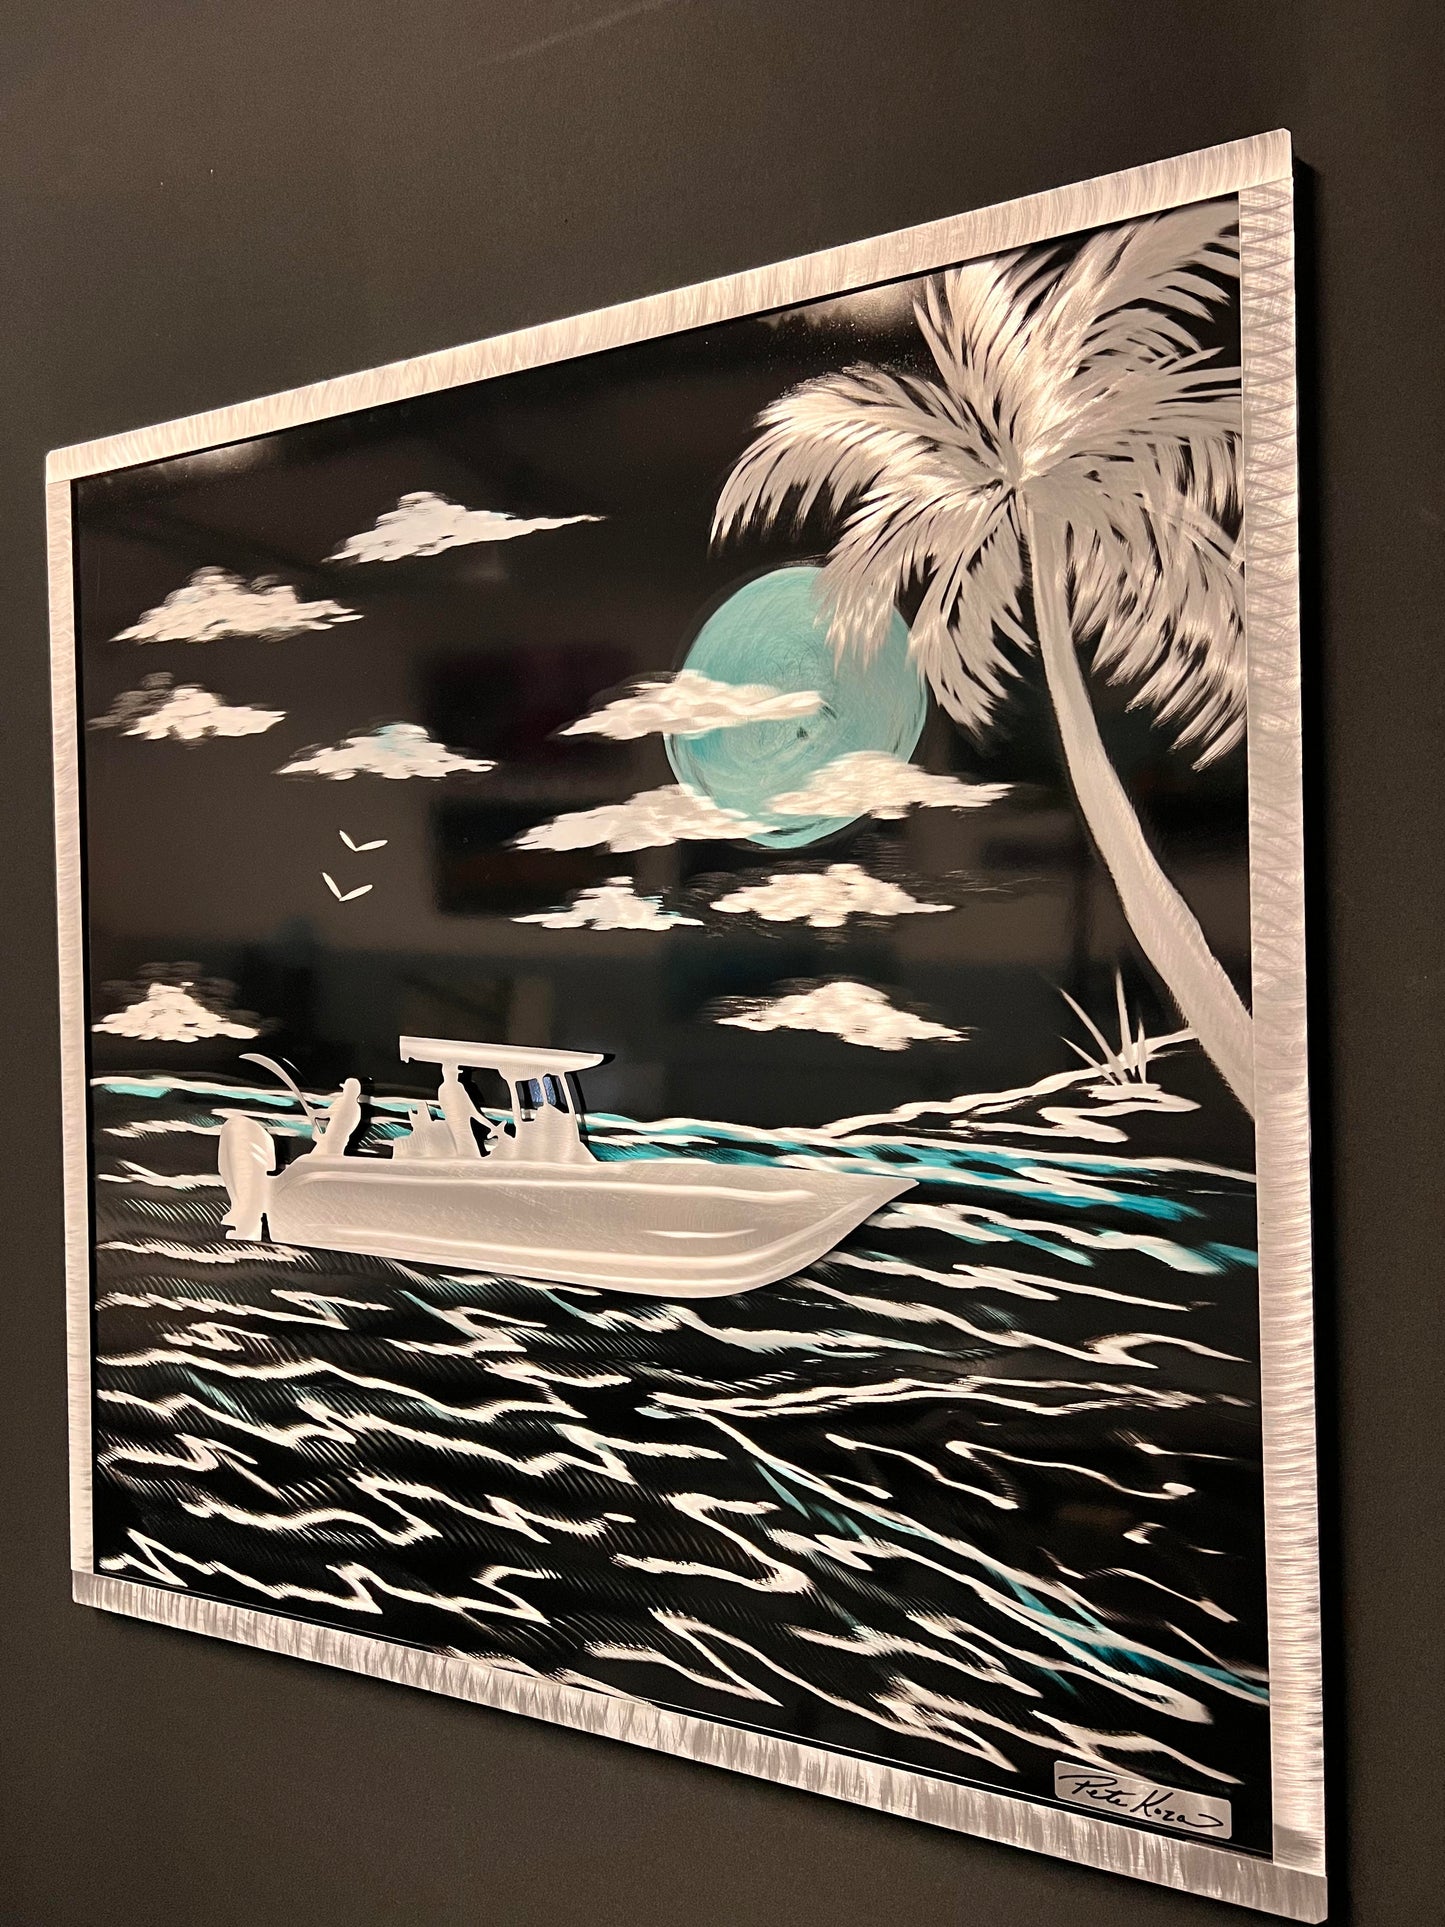 20% OFF! *New Night Fishing Scene *One Of A Kind*